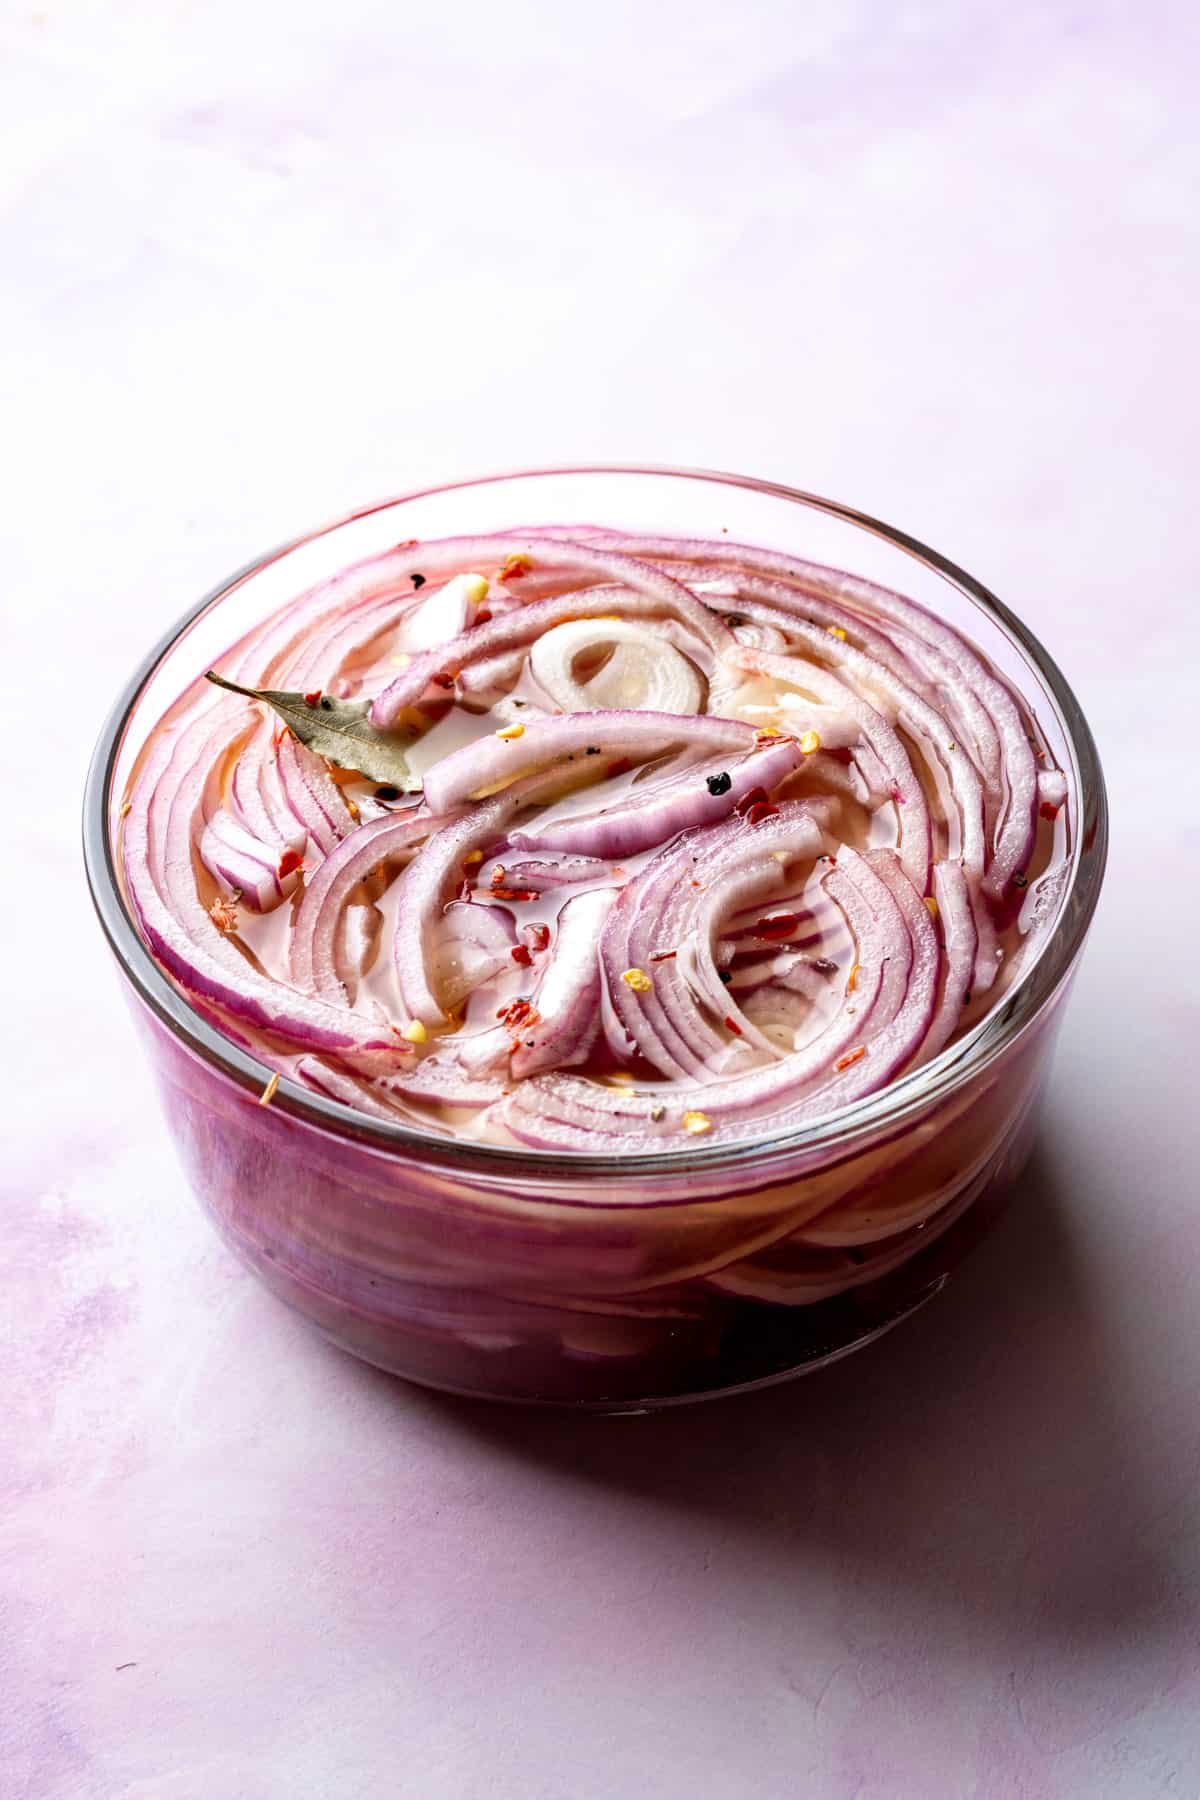 A glass bowl of sliced pickled red onions with spices.